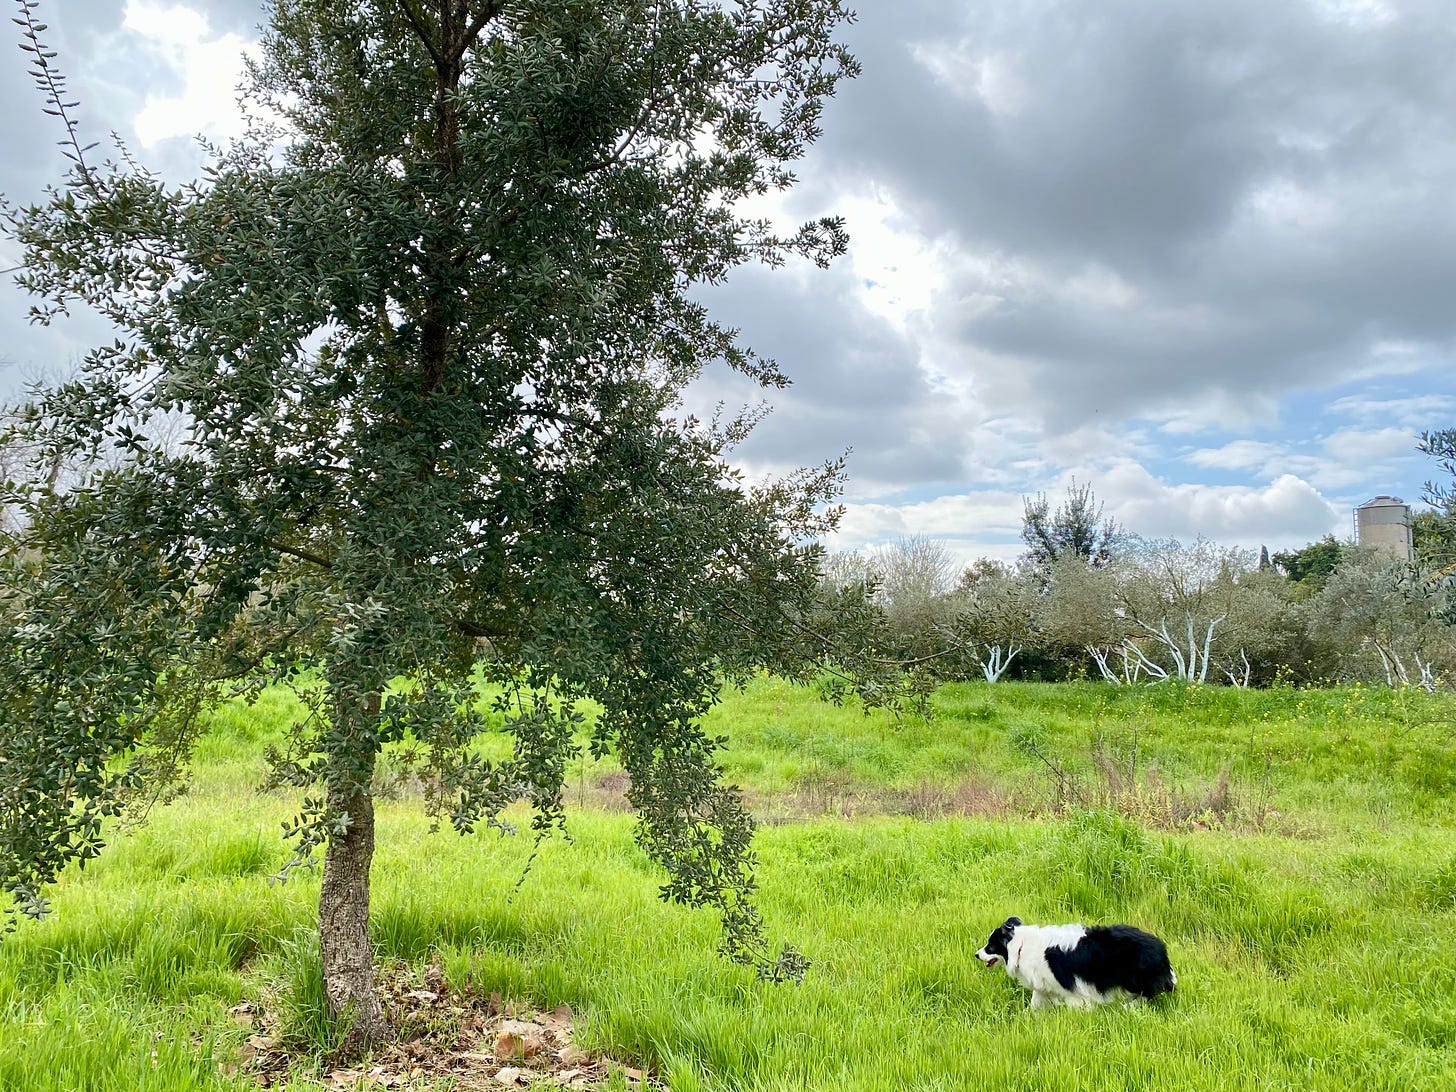 Border collie and an oak tree under a cloudy sky